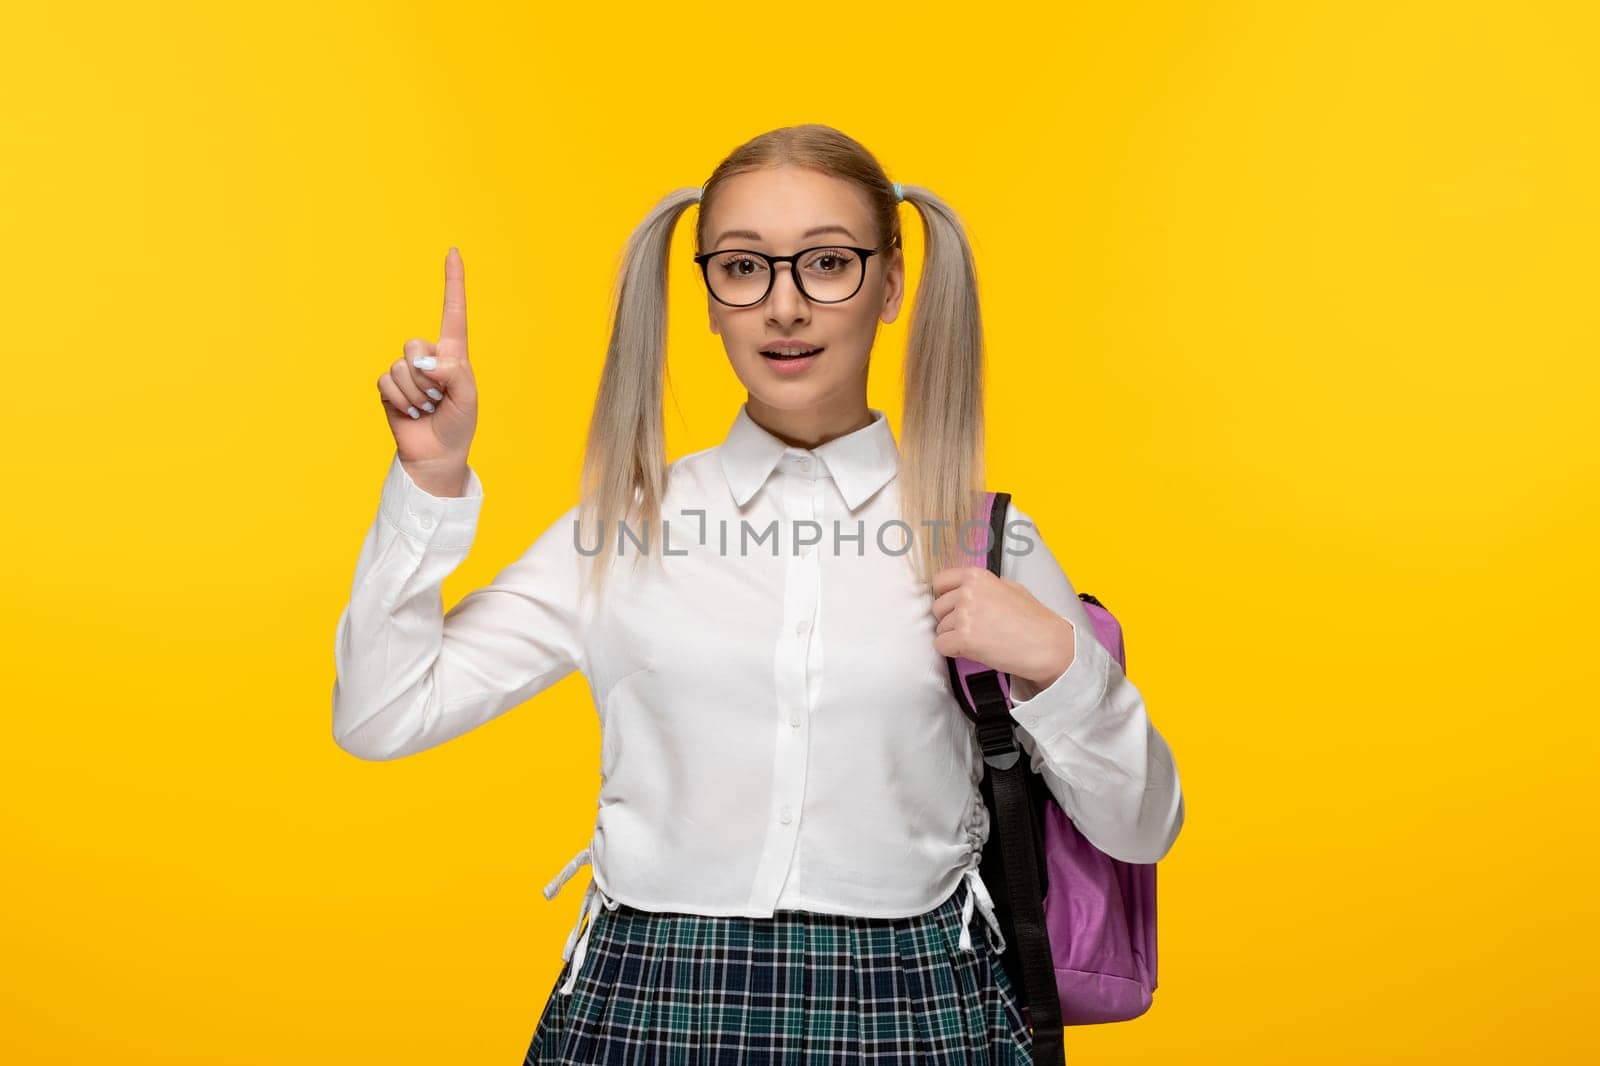 world book day blonde young girl with ponytails on yellow background